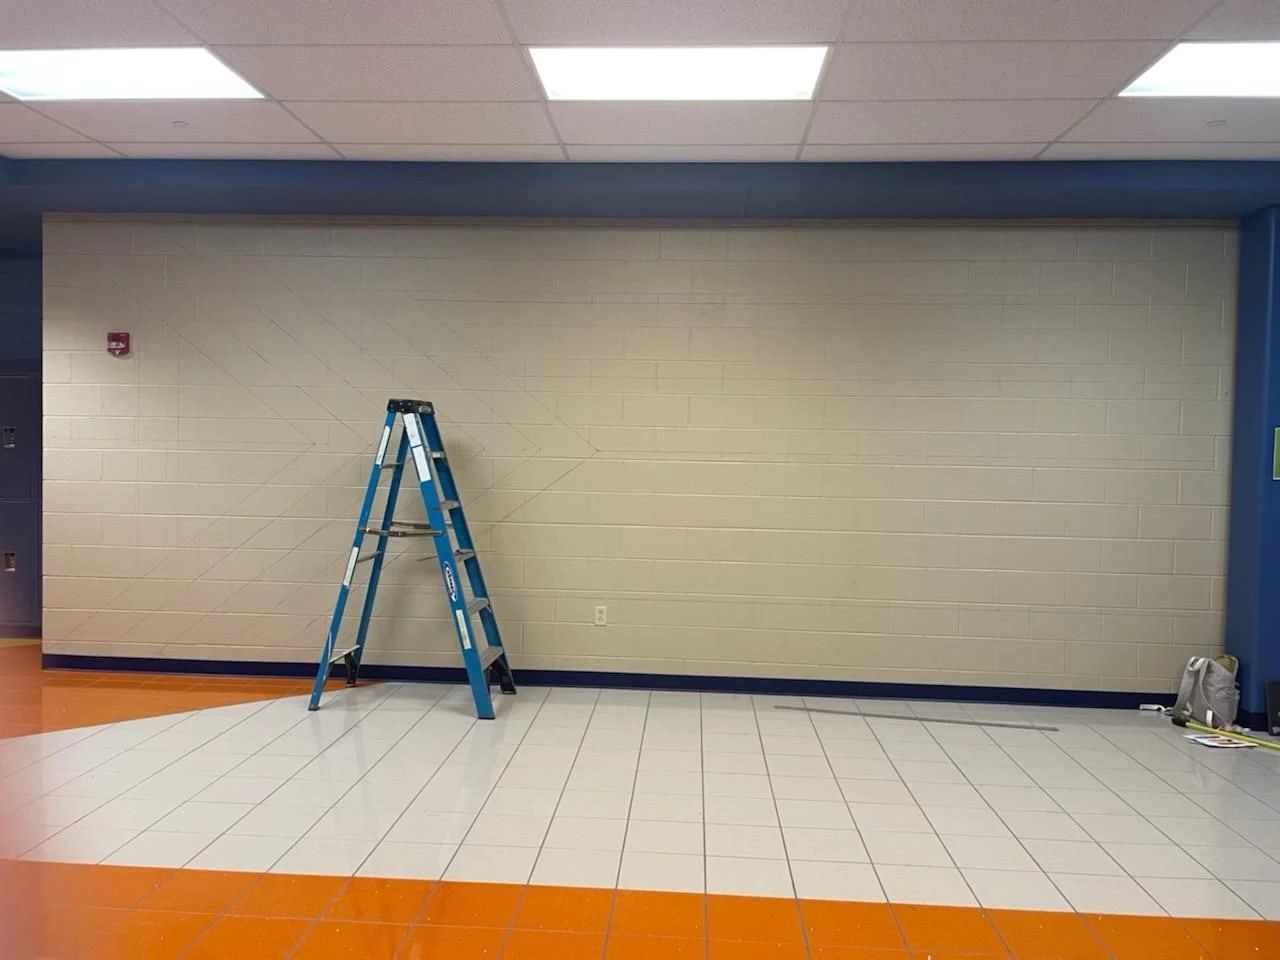 The outline of student Oliver Bryant's LGBTQ+ pride flag mural is faintly visible on the wall at Chambersburg Area Senior High School in this photo taken prior to the work being painted over by the school 